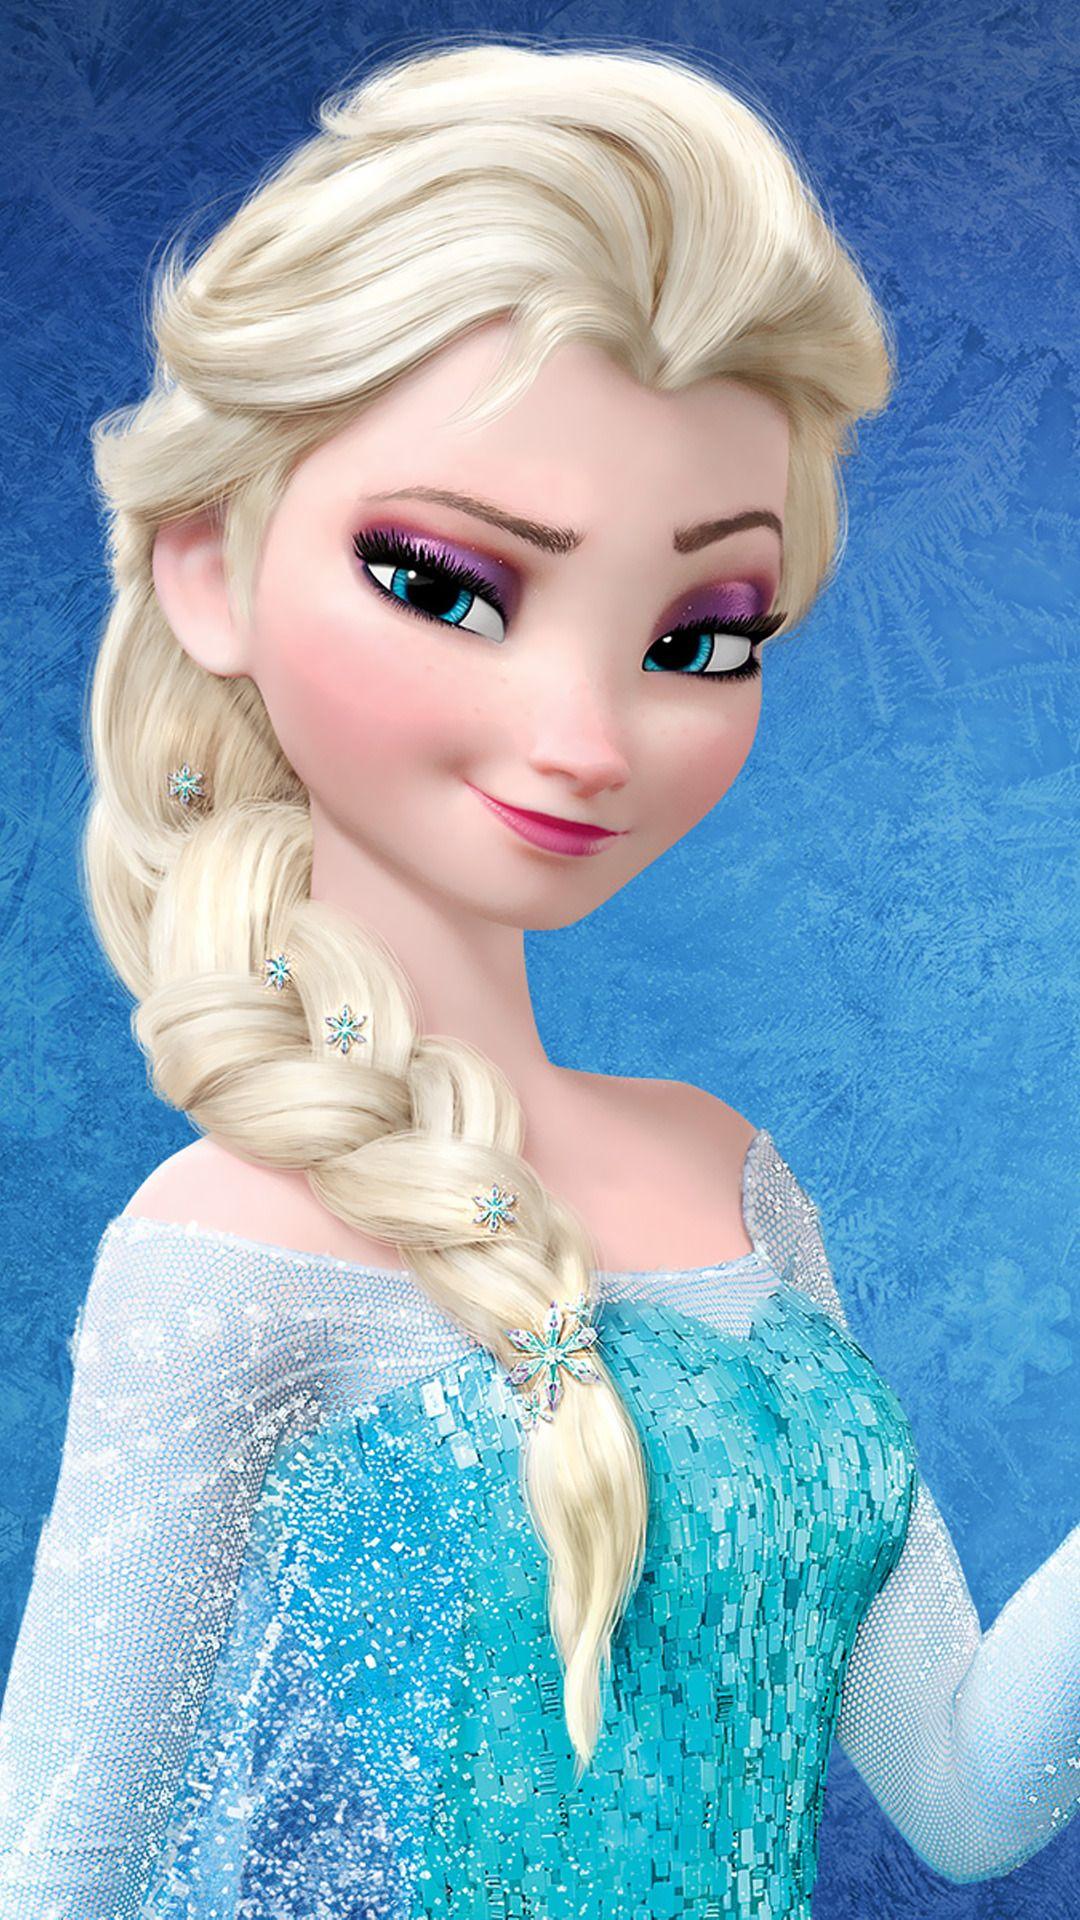 Frozen Elsa htc one wallpaper, free and easy to download